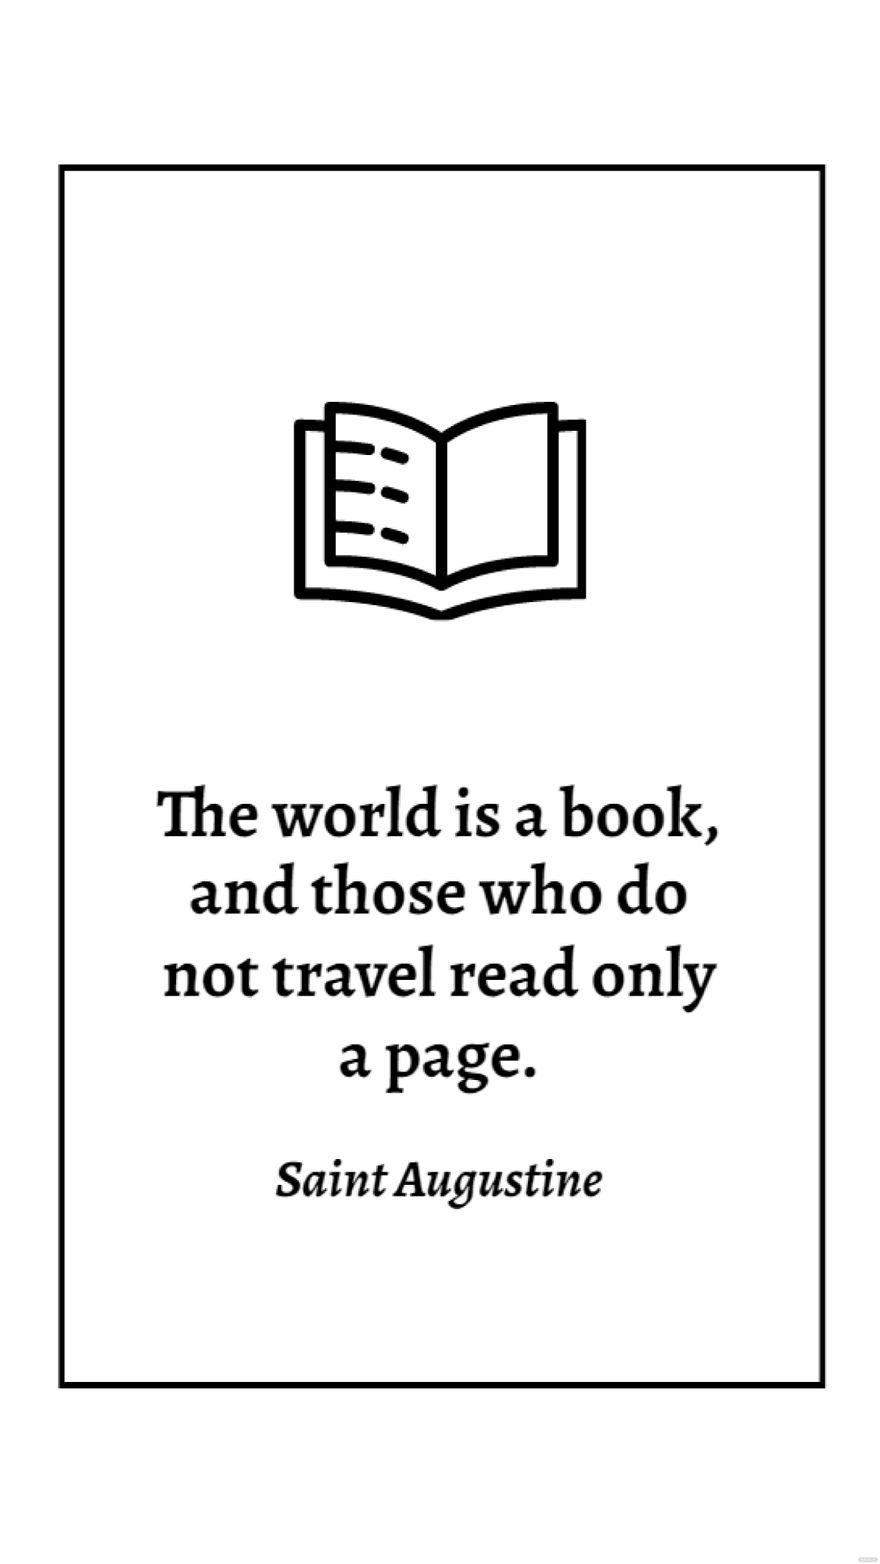 Free Saint Augustine - The world is a book, and those who do not travel read only a page. in JPG